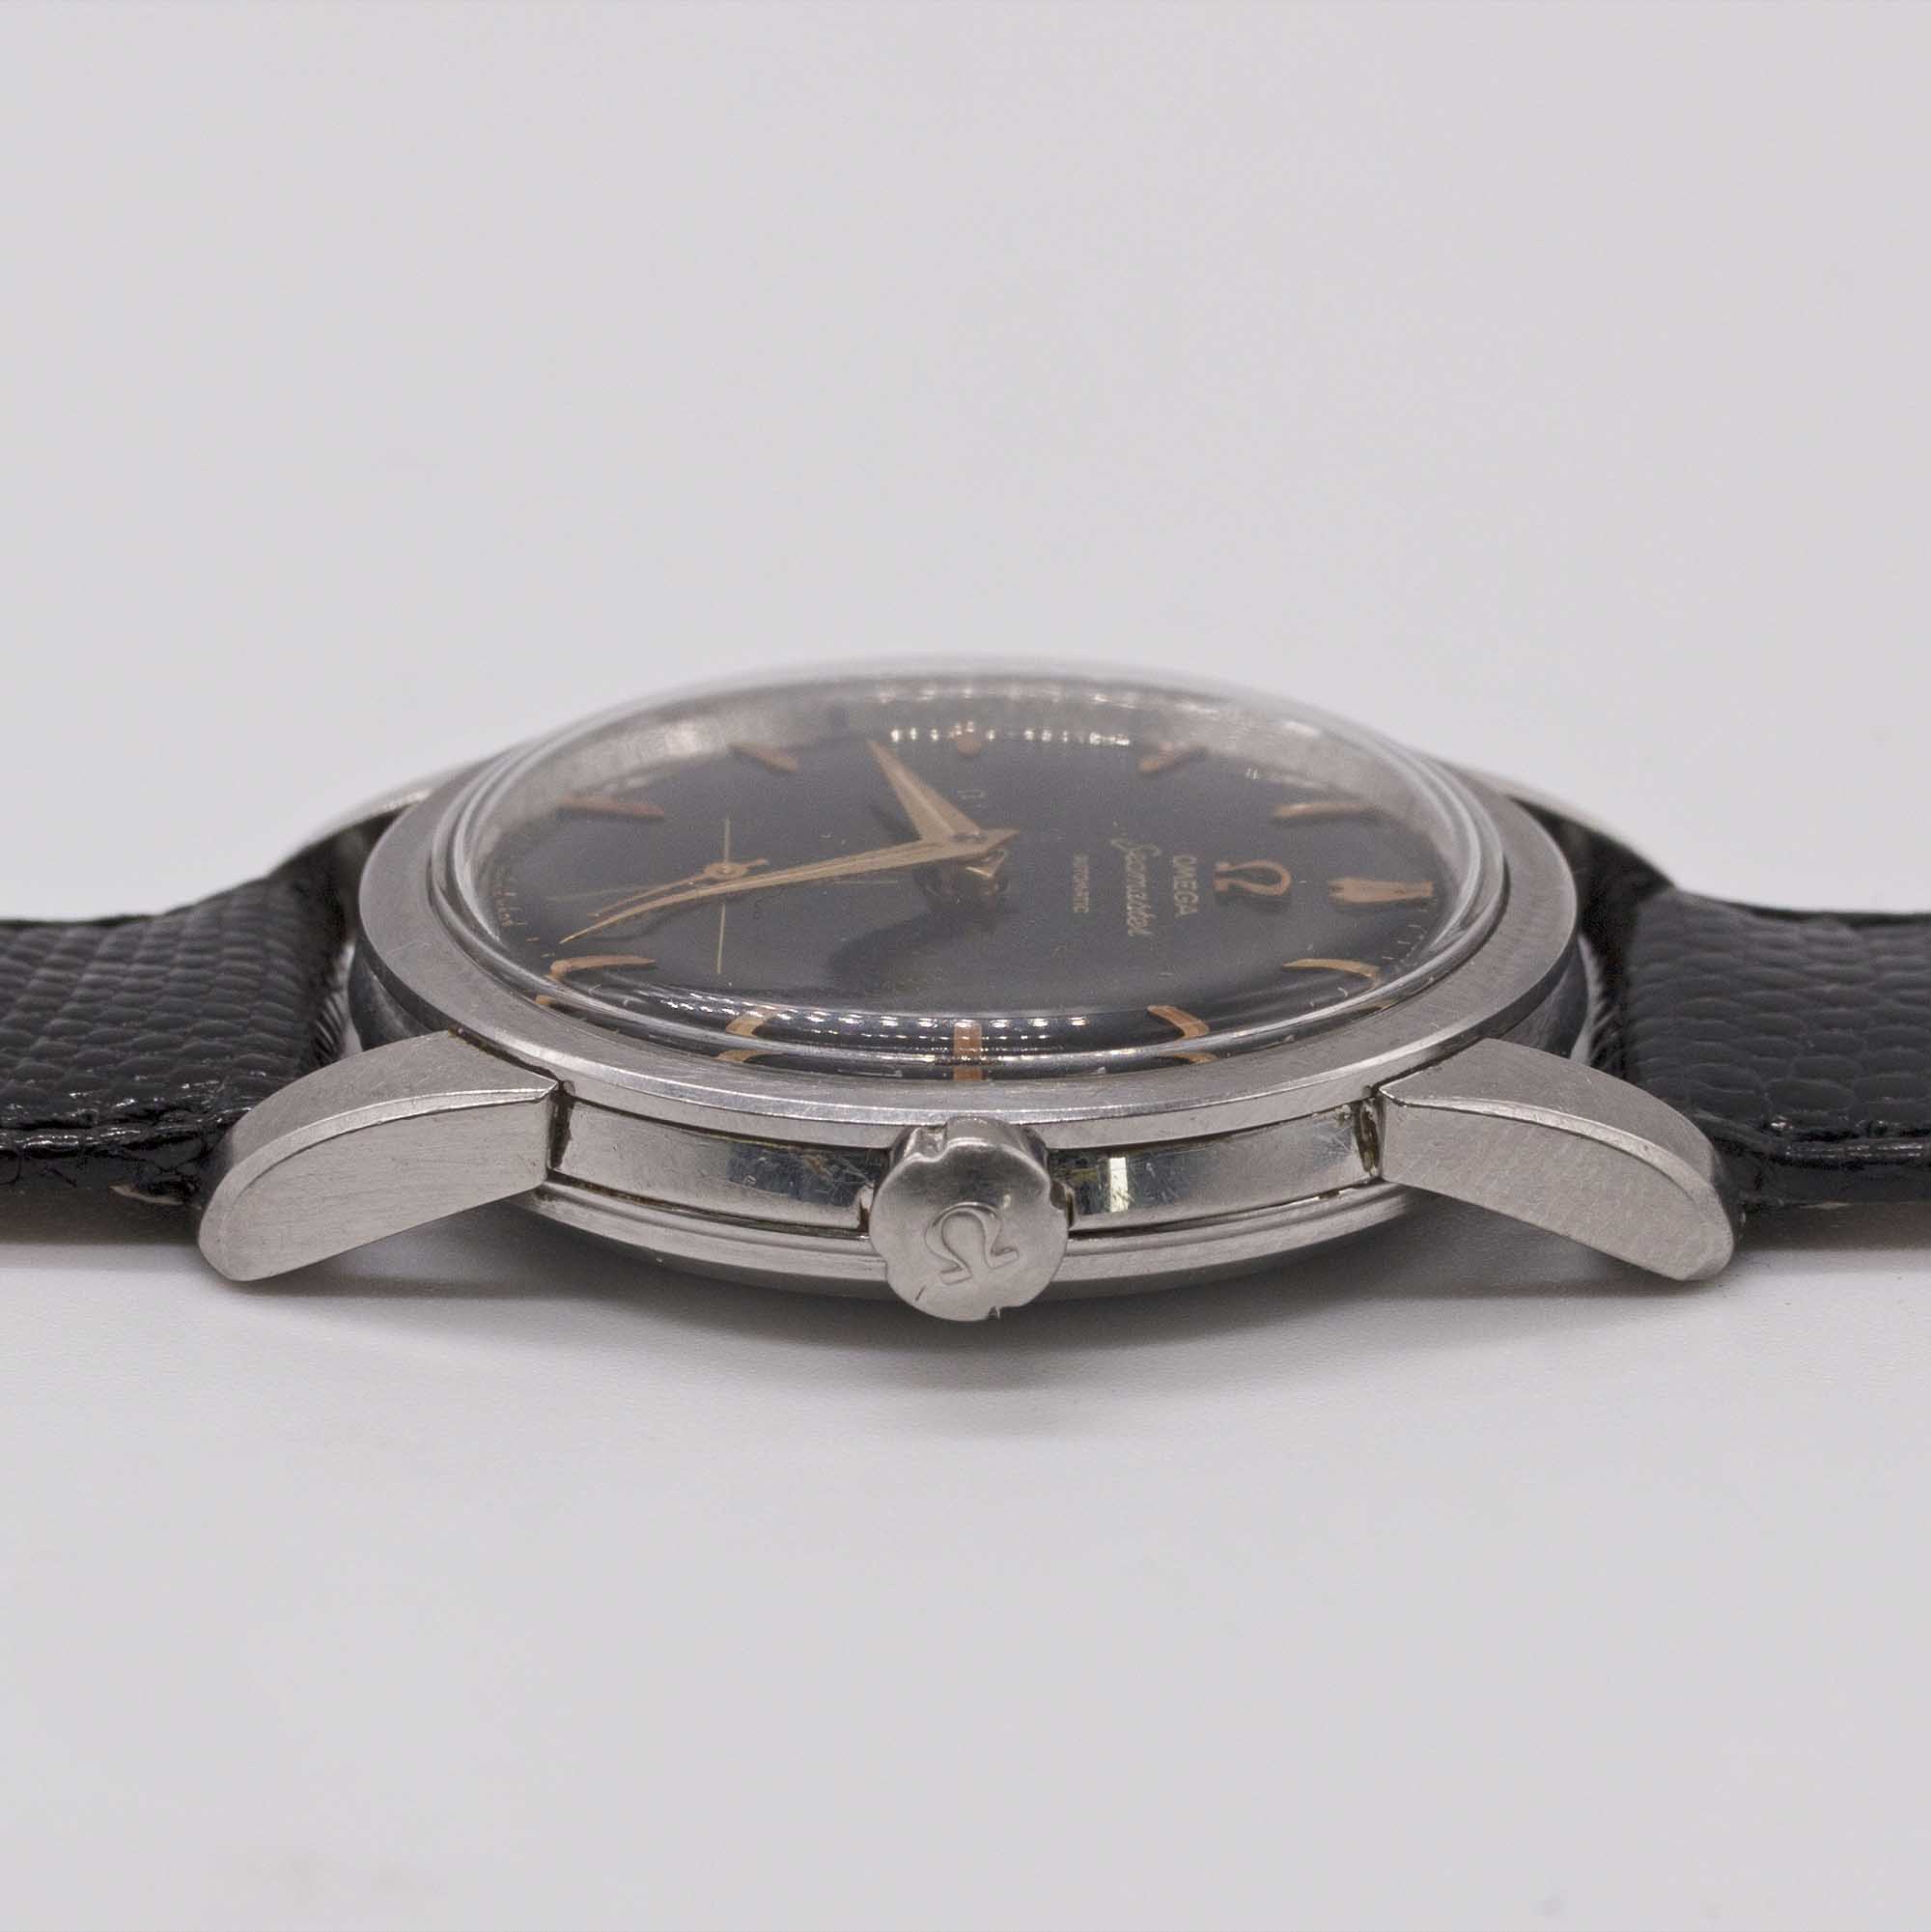 A GENTLEMAN'S STAINLESS STEEL OMEGA SEAMASTER AUTOMATIC WRIST WATCH CIRCA 1956, REF. 2846 / 2848 6 - Image 7 of 8